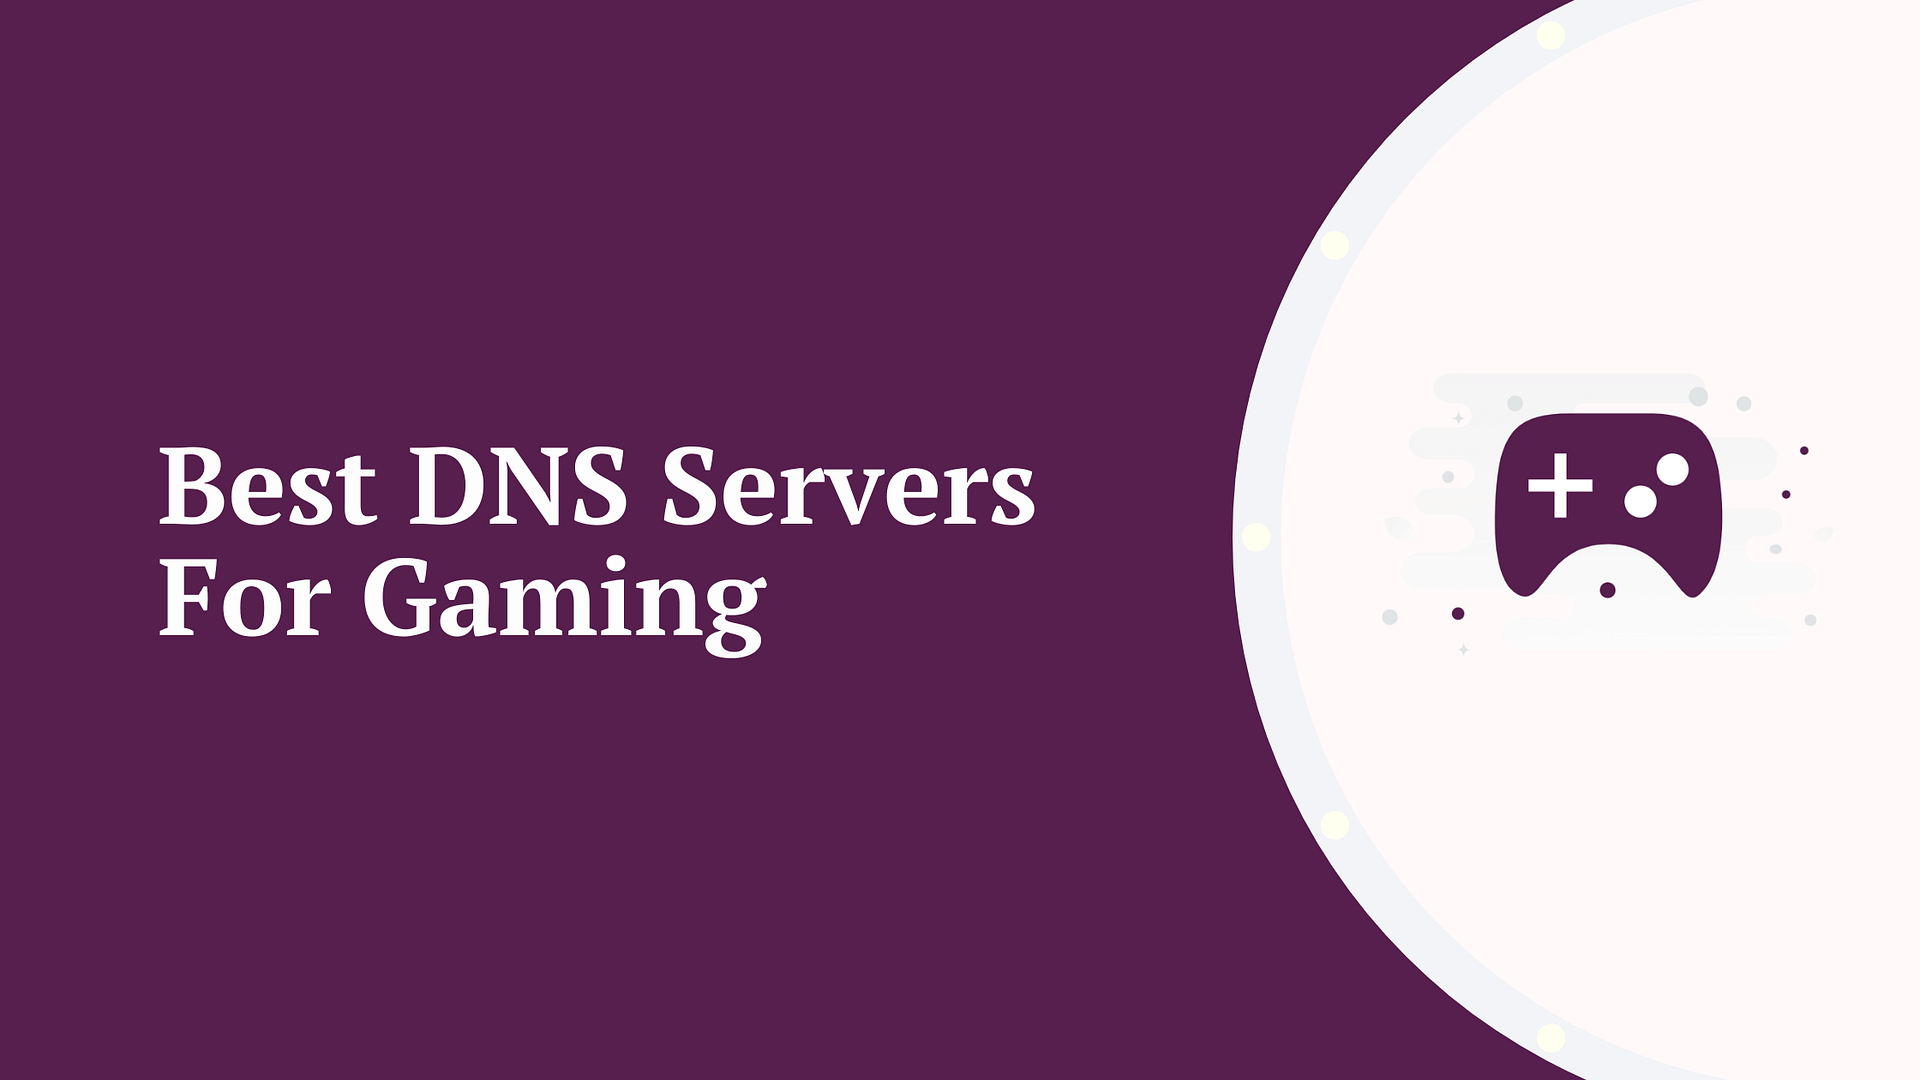 Best DNS servers for gaming.